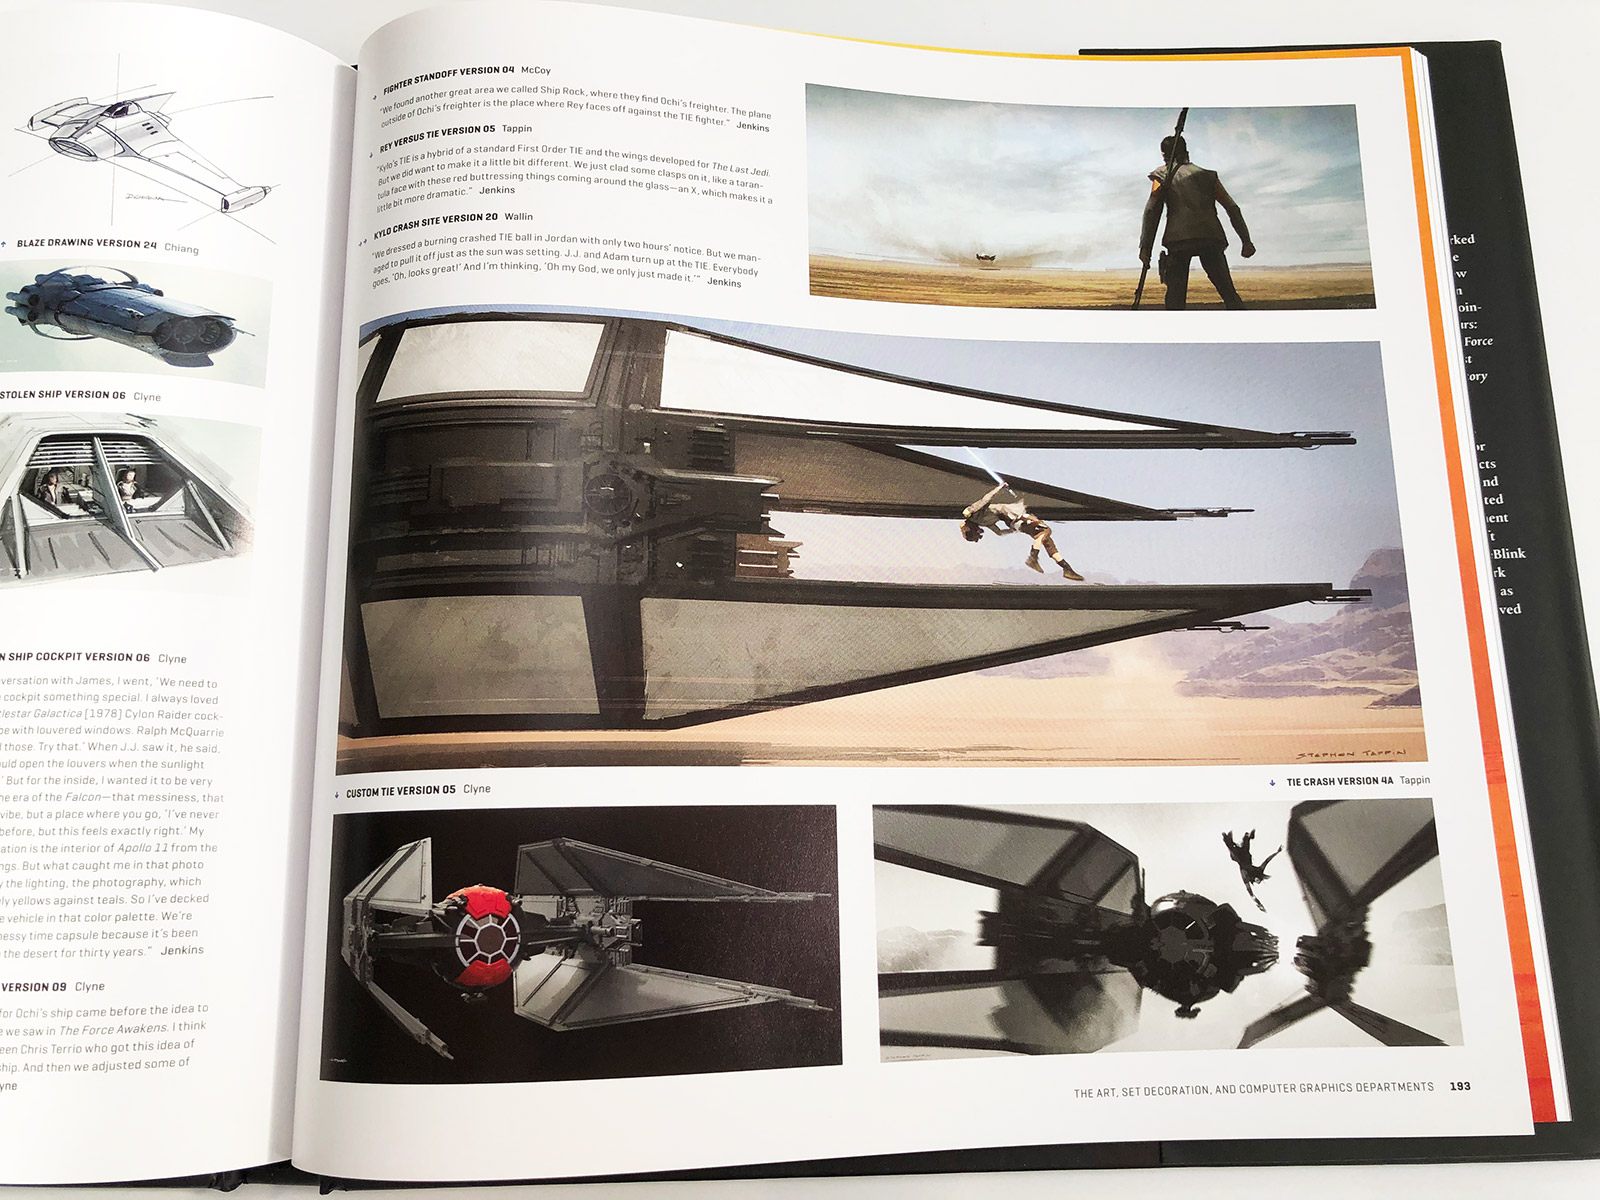 Book Review: The Art of Star Wars: The Last Jedi